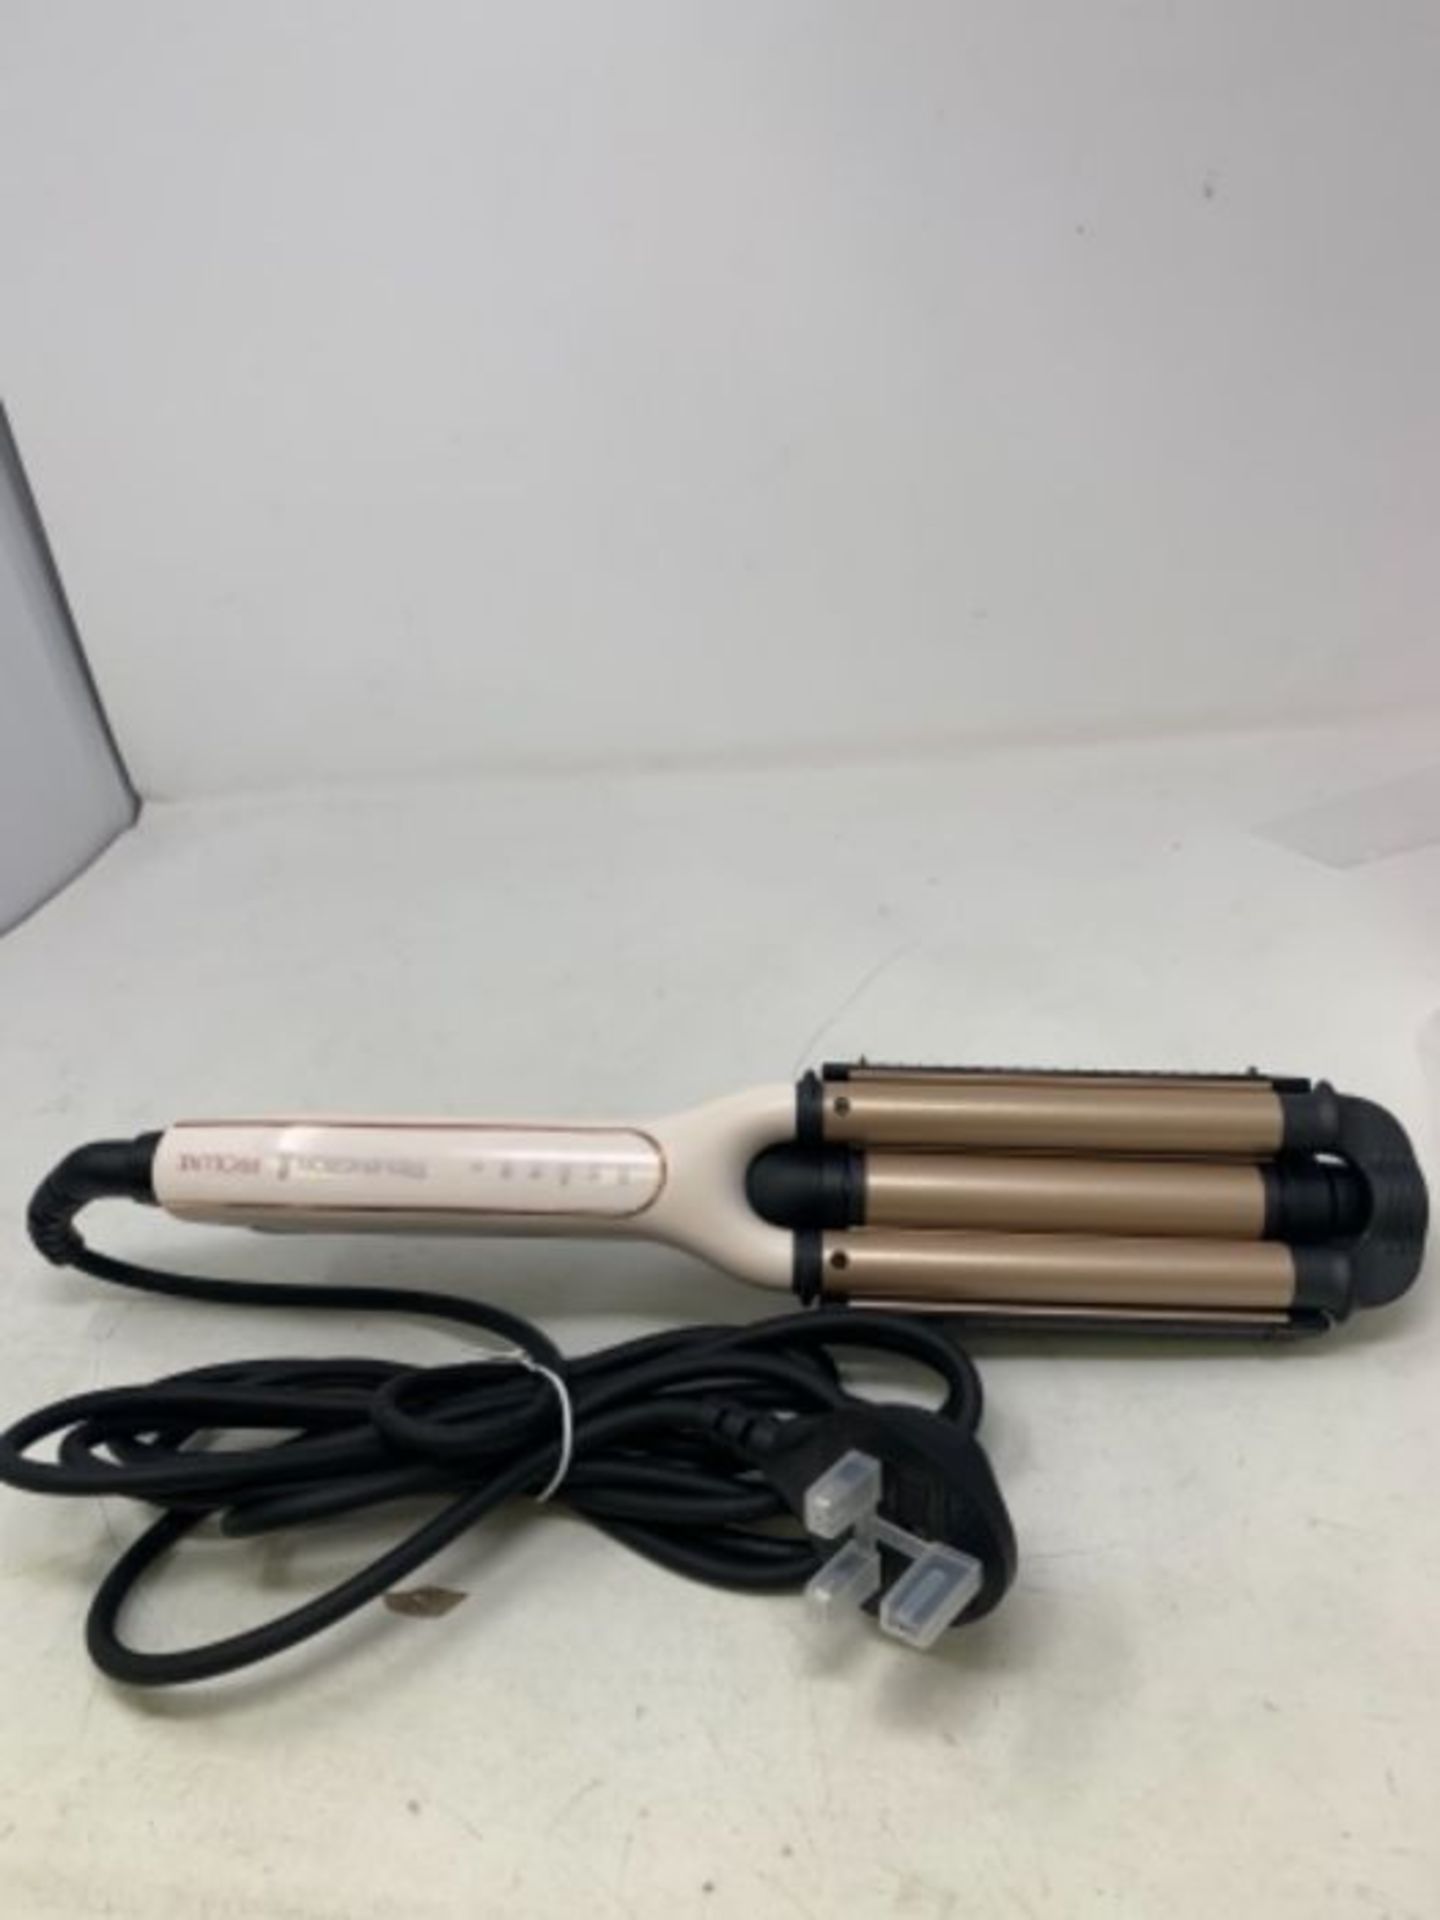 Remington Proluxe 4-in-1 Hair Waver - Deep Barrel Adjustable Hair Curler with 4 Differ - Image 2 of 2